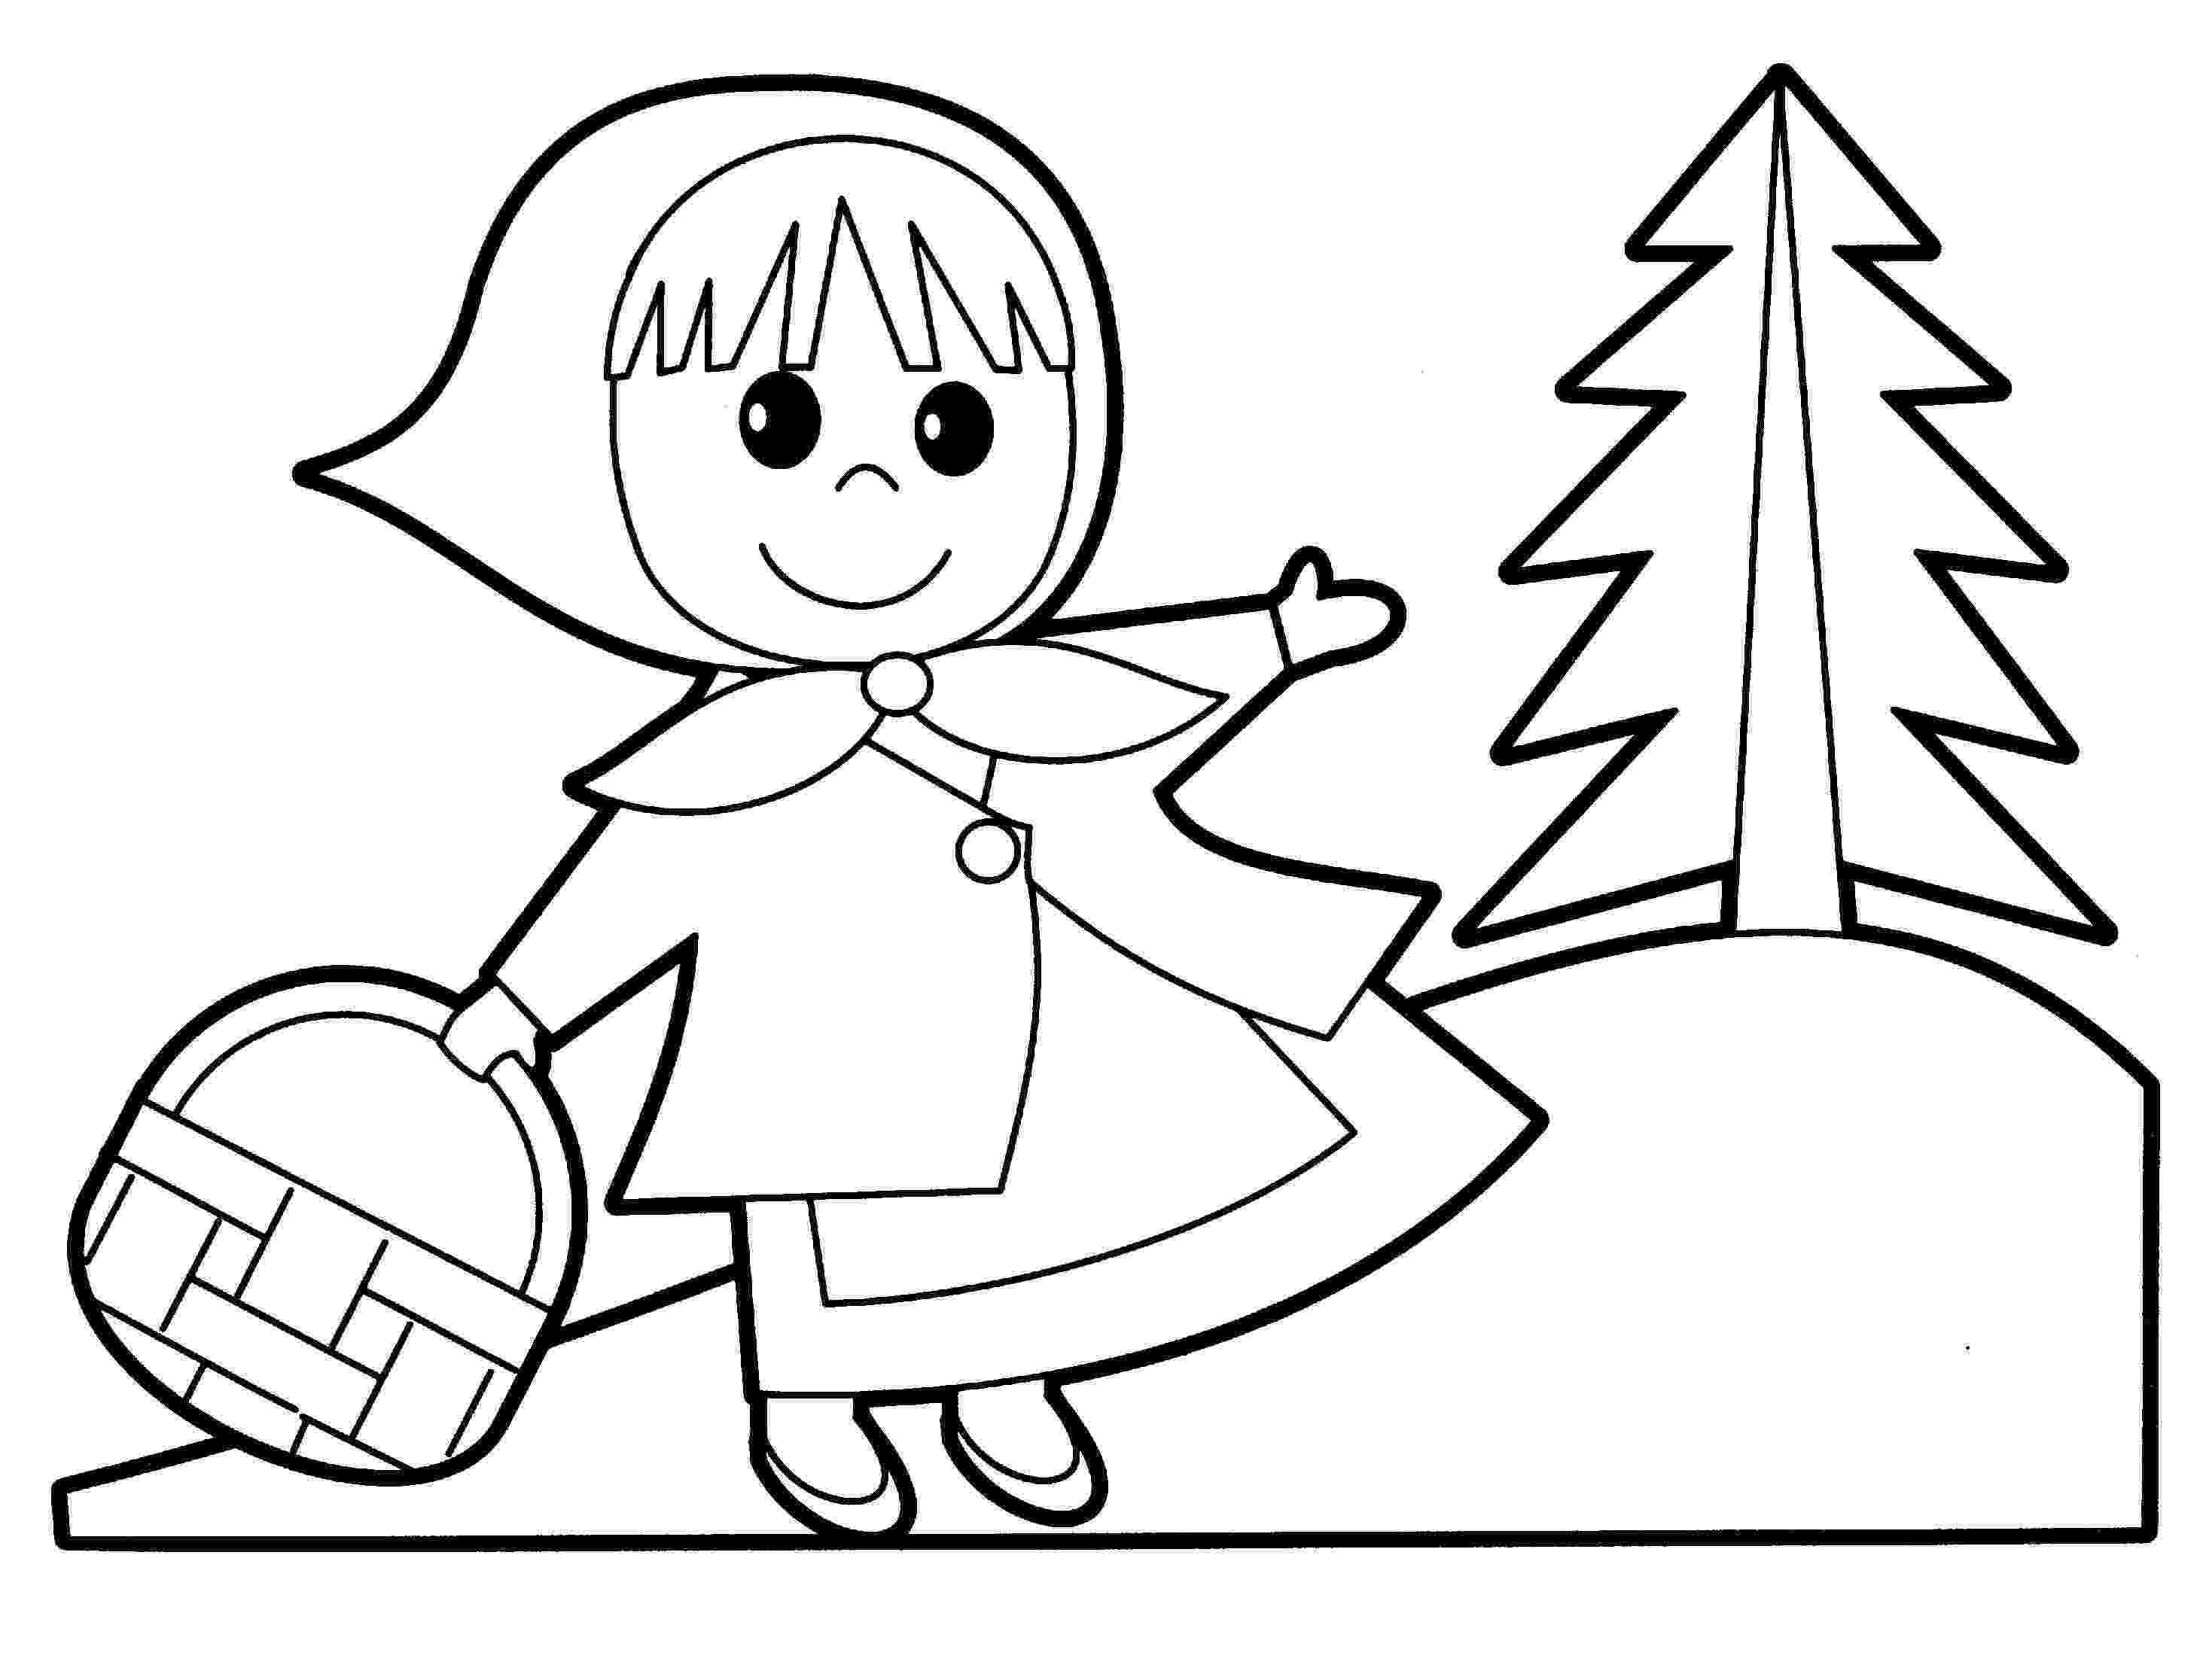 little red riding hood coloring sheet little red riding hood drawing at getdrawingscom free riding red hood coloring little sheet 